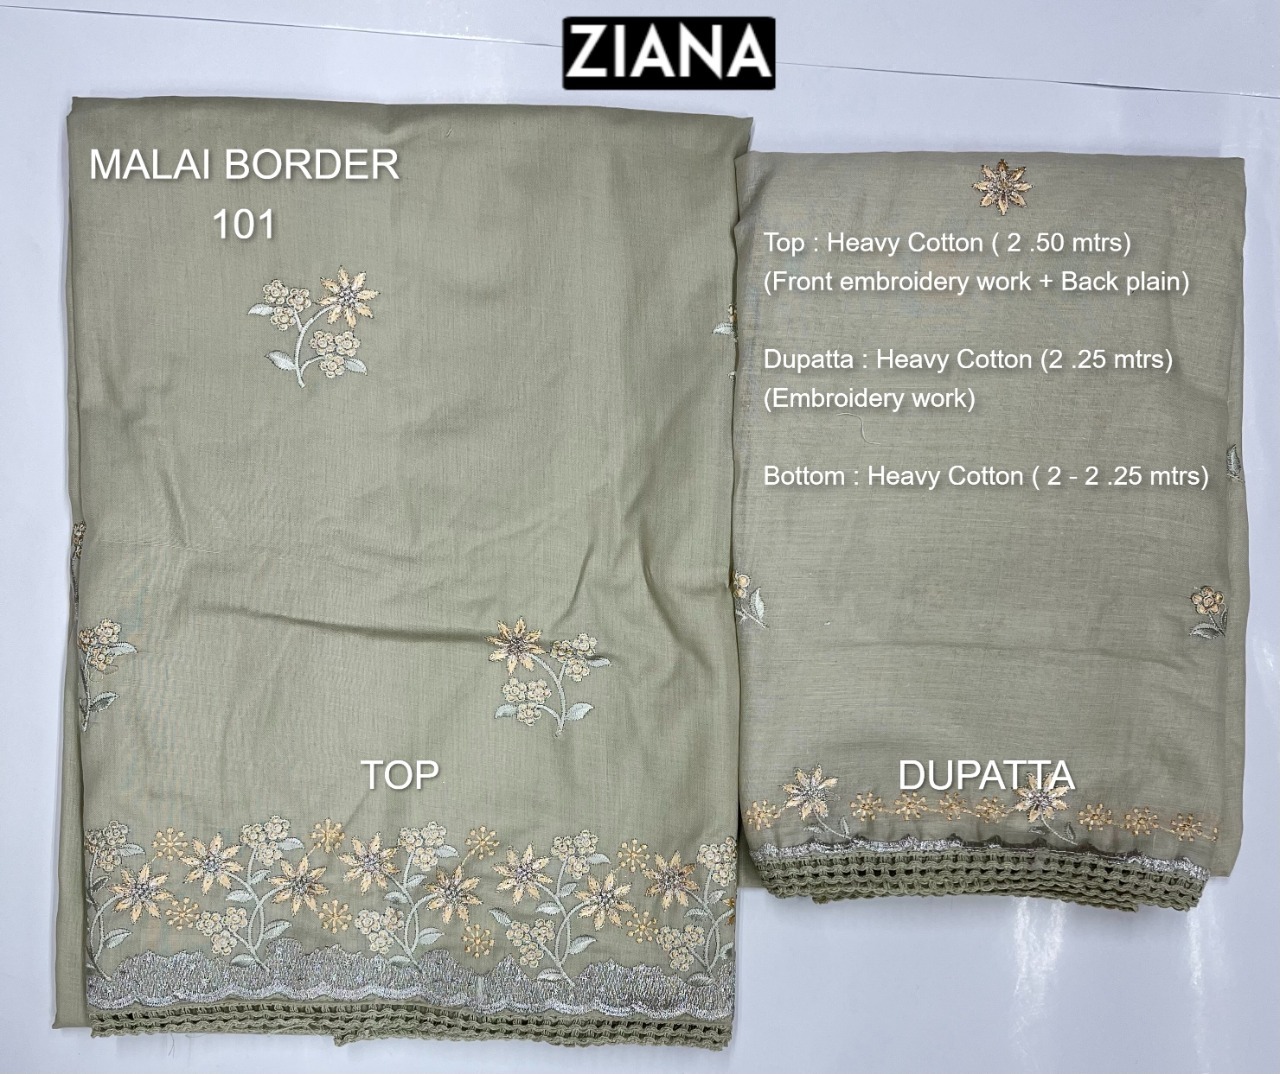 ziana malai border 101 heavy cotton catchy look embroidery salwar suit colour set